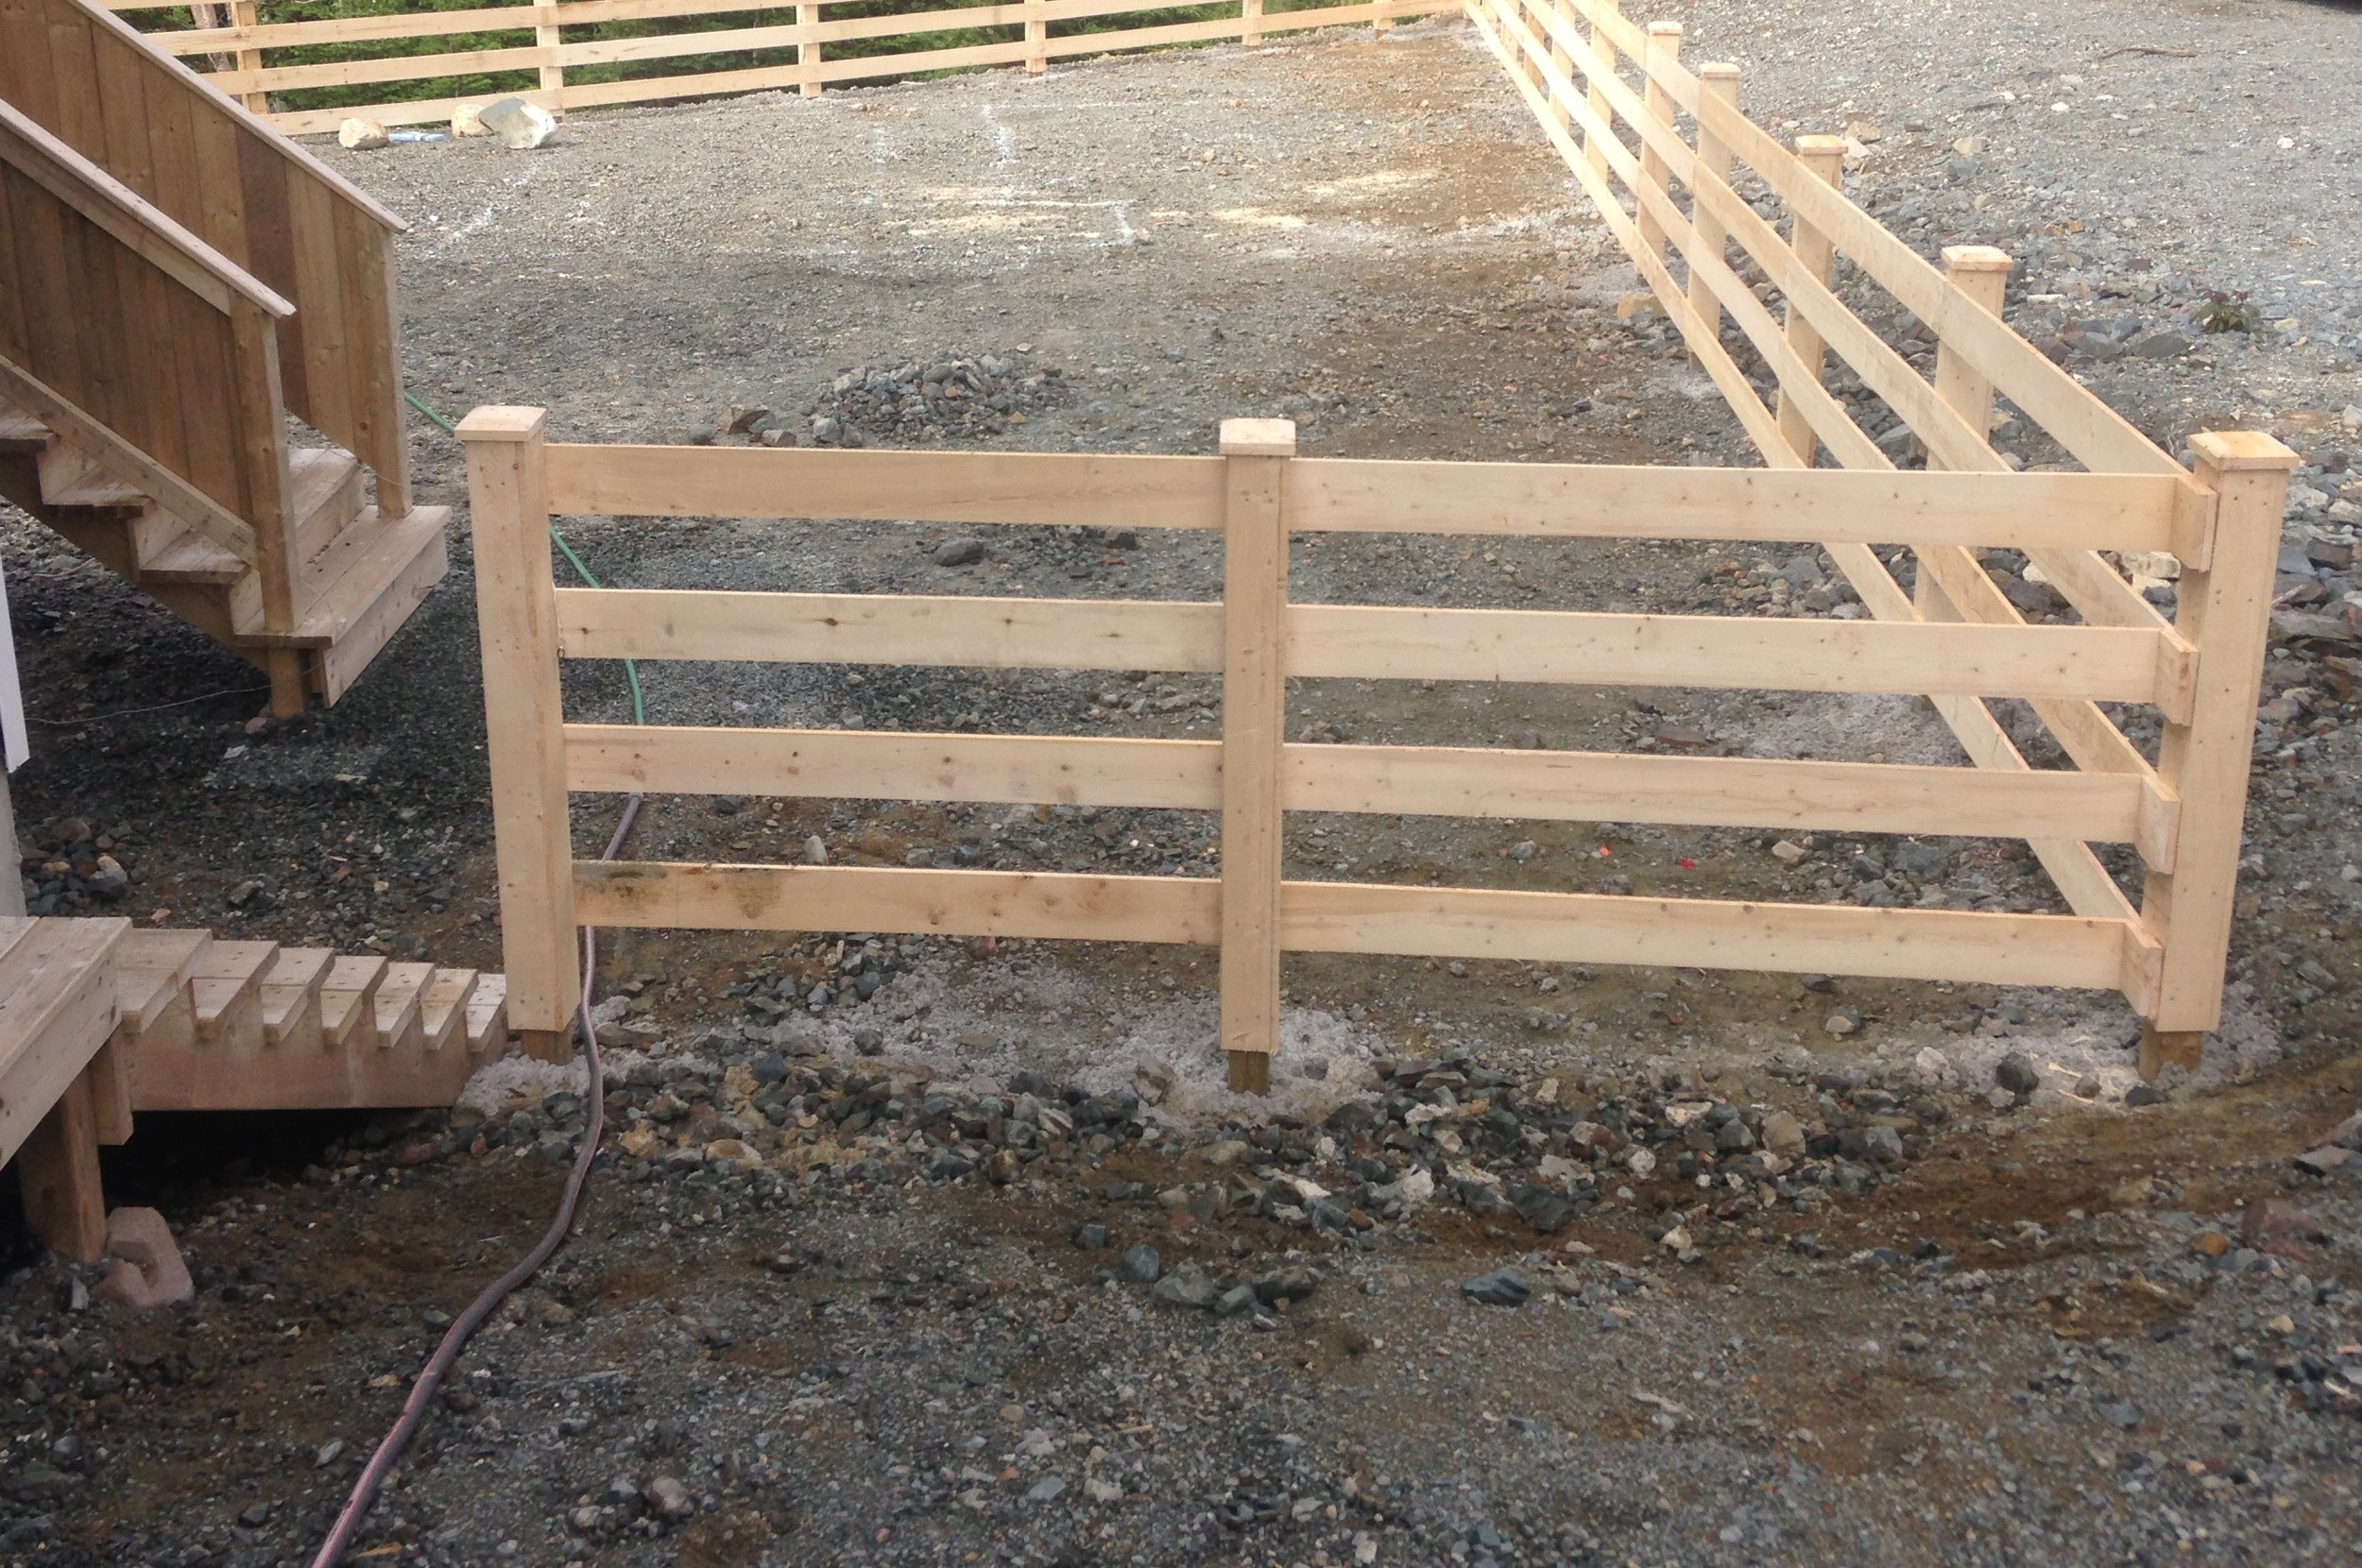 Pressure treated posts in concrete, clad with rough cut lumber and rough cut rails